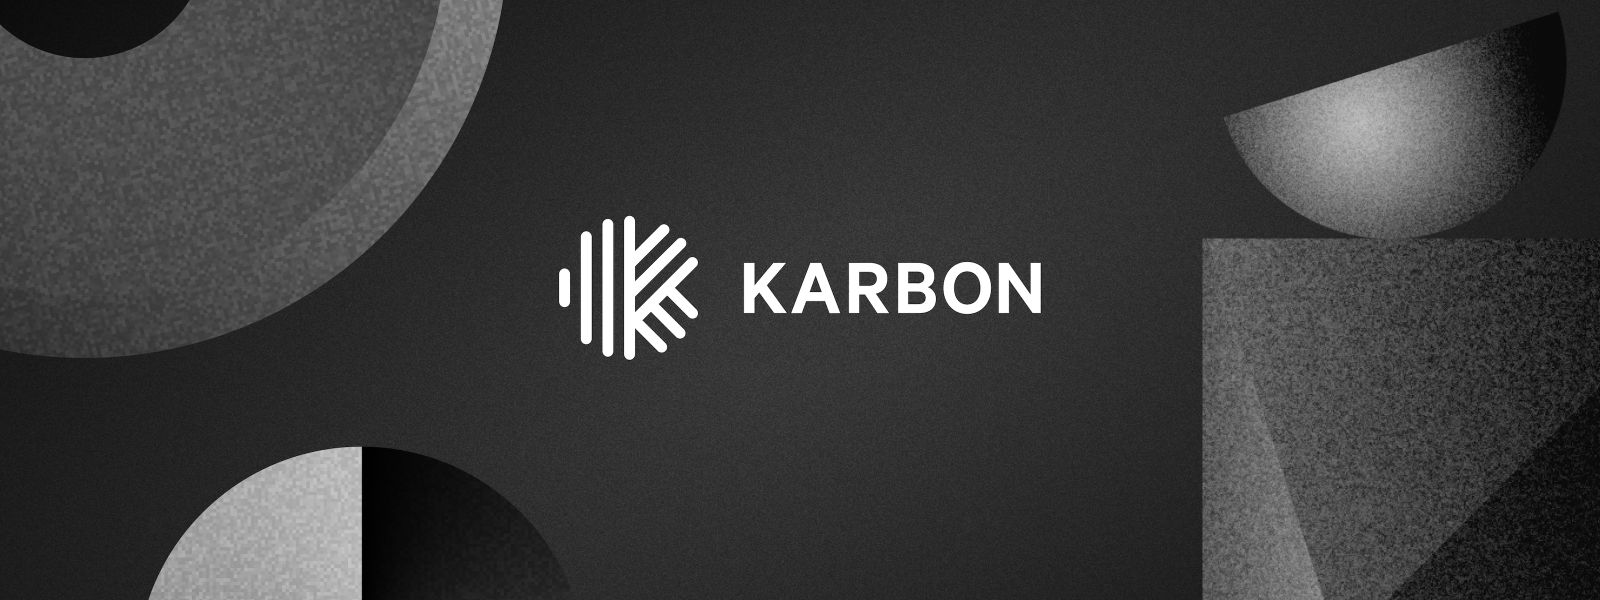 A monochromatic and geometric background with the Karbon logo prominently displayed.